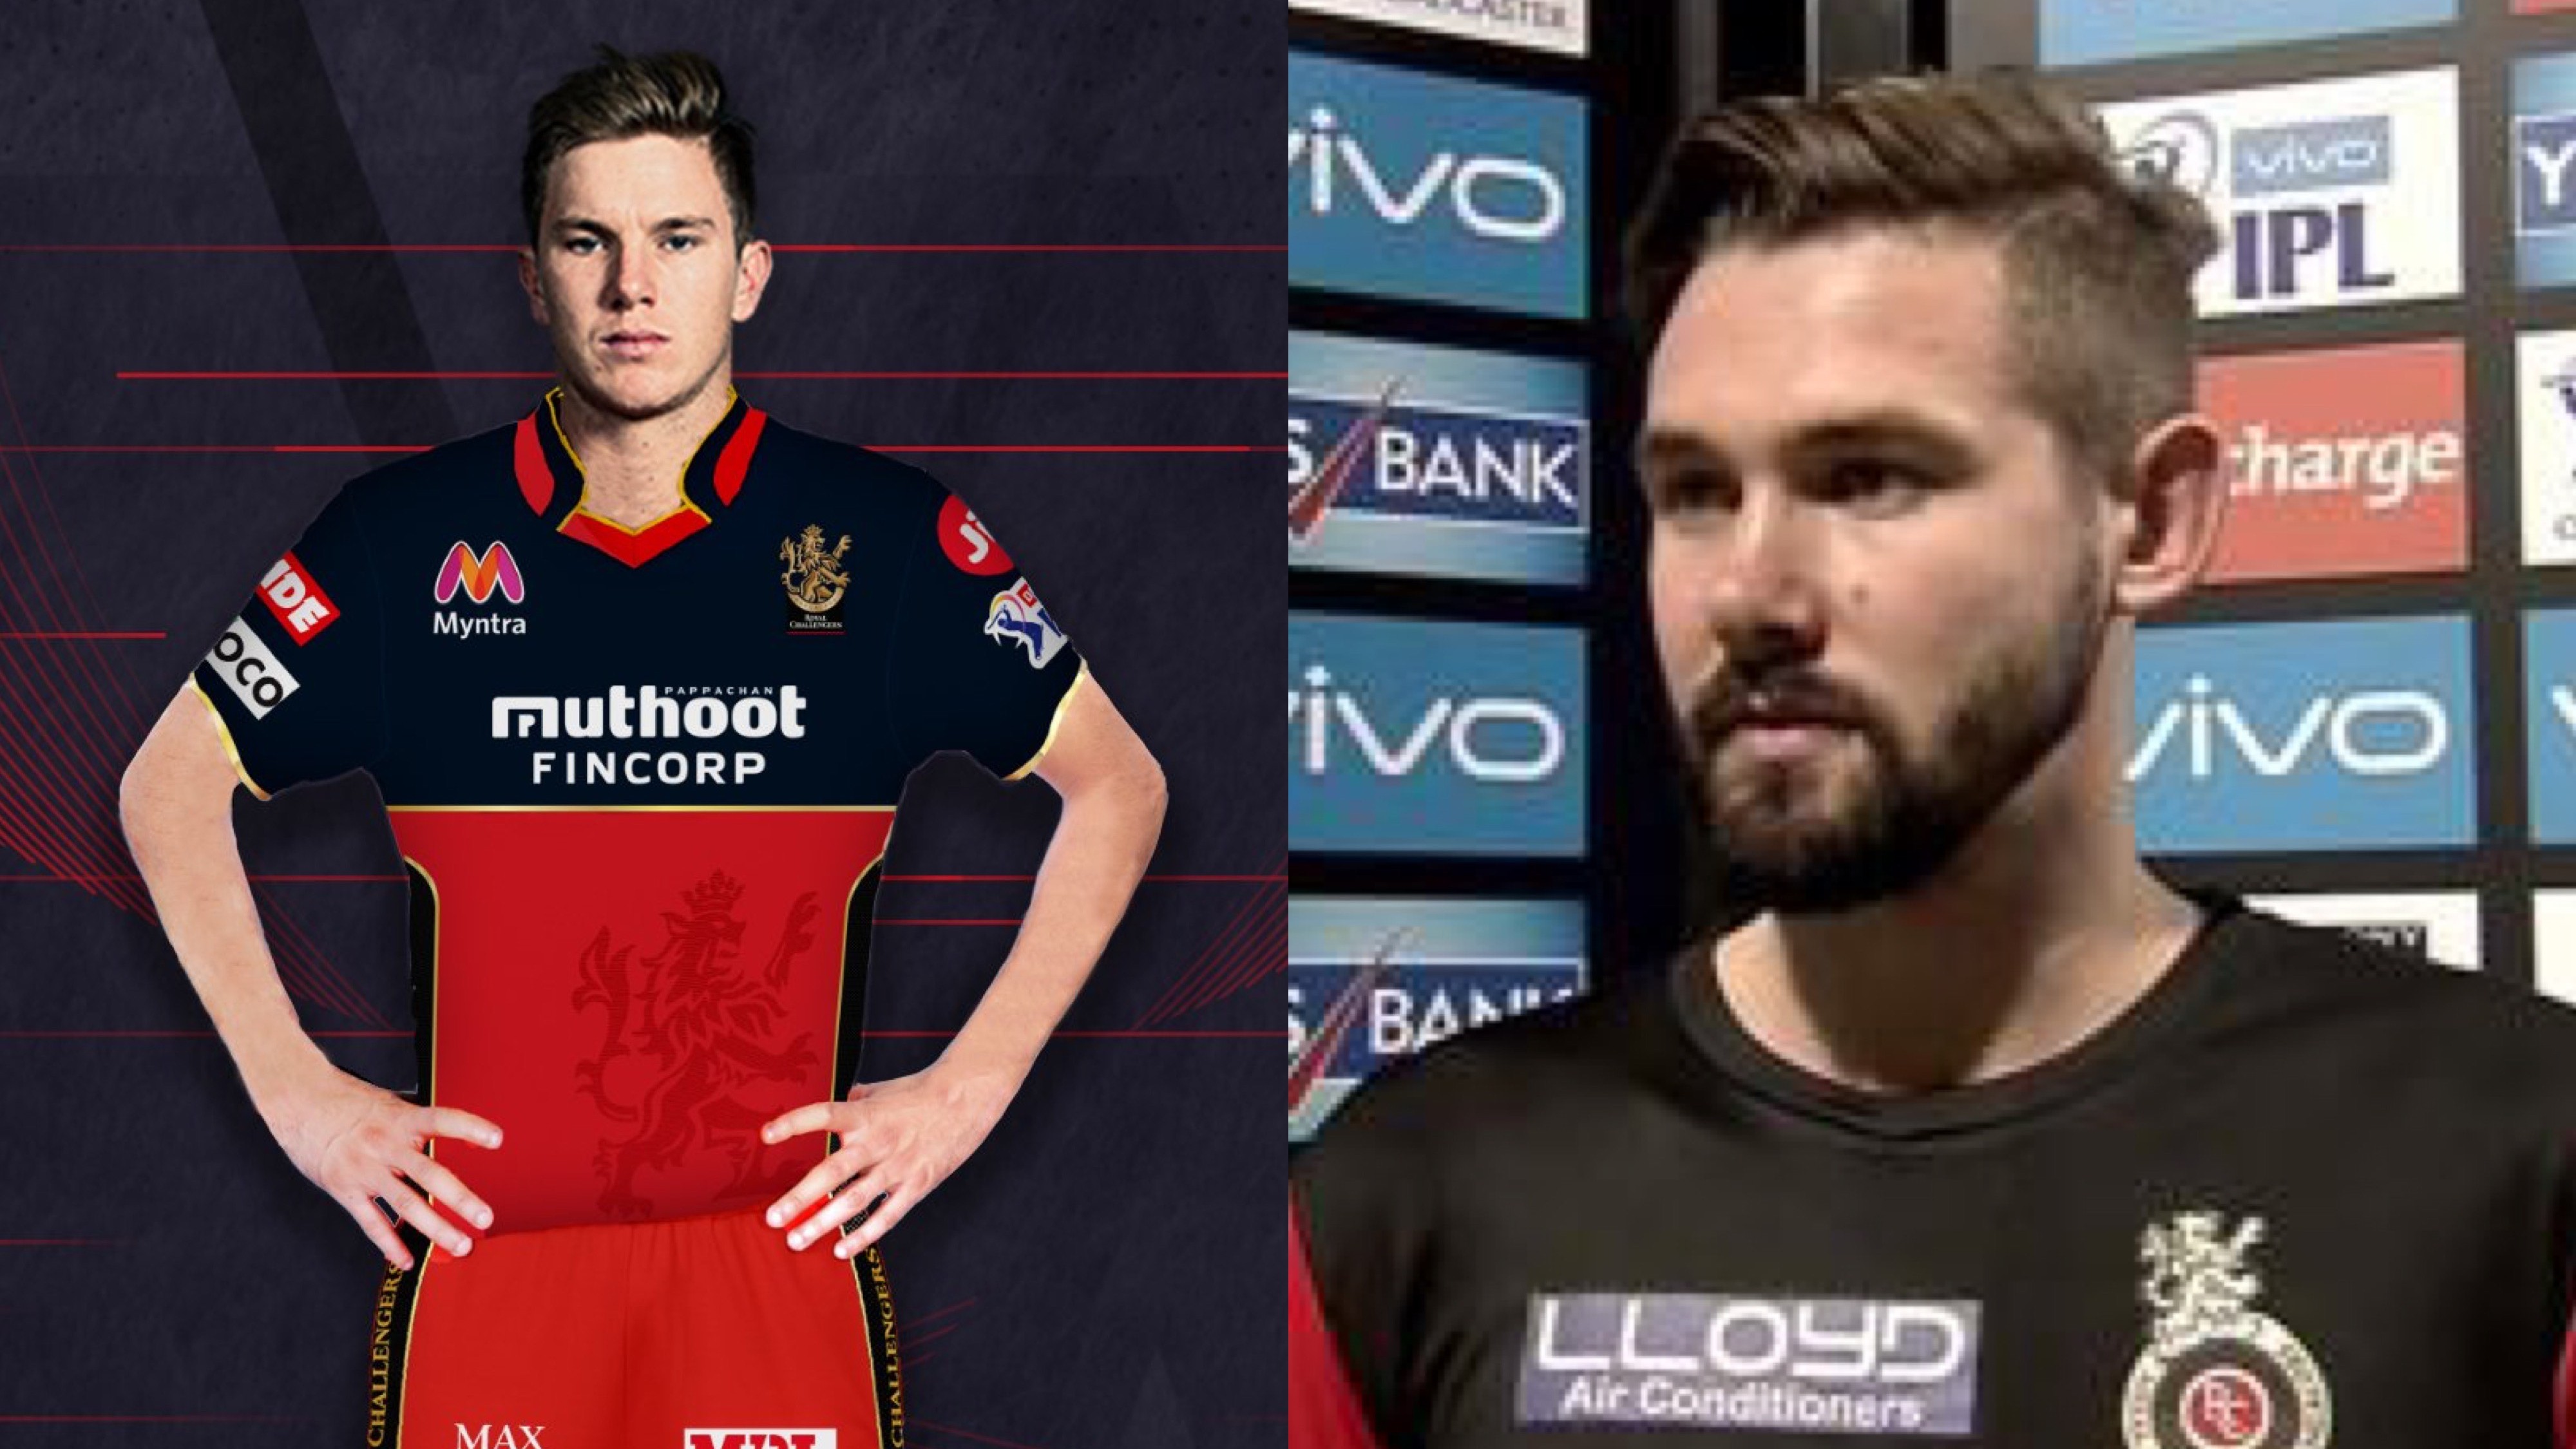 IPL 2020: RCB announces Adam Zampa as replacement after Kane Richardson pulls out of IPL 13